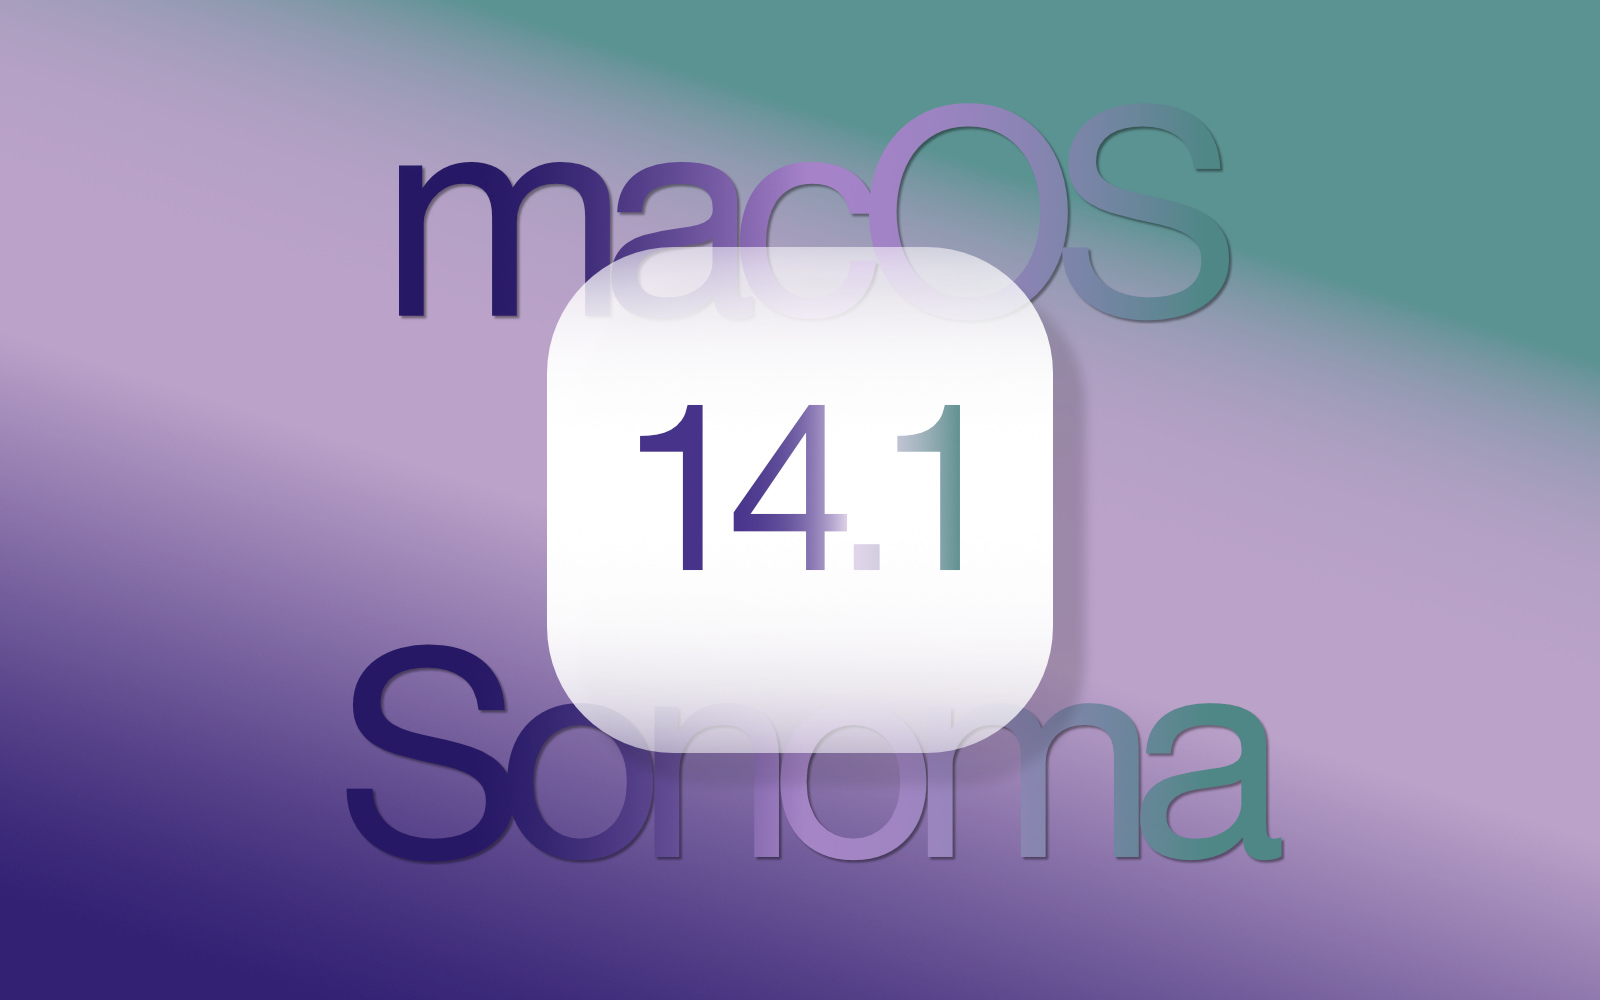 Macos Sonoma 14 1 official release